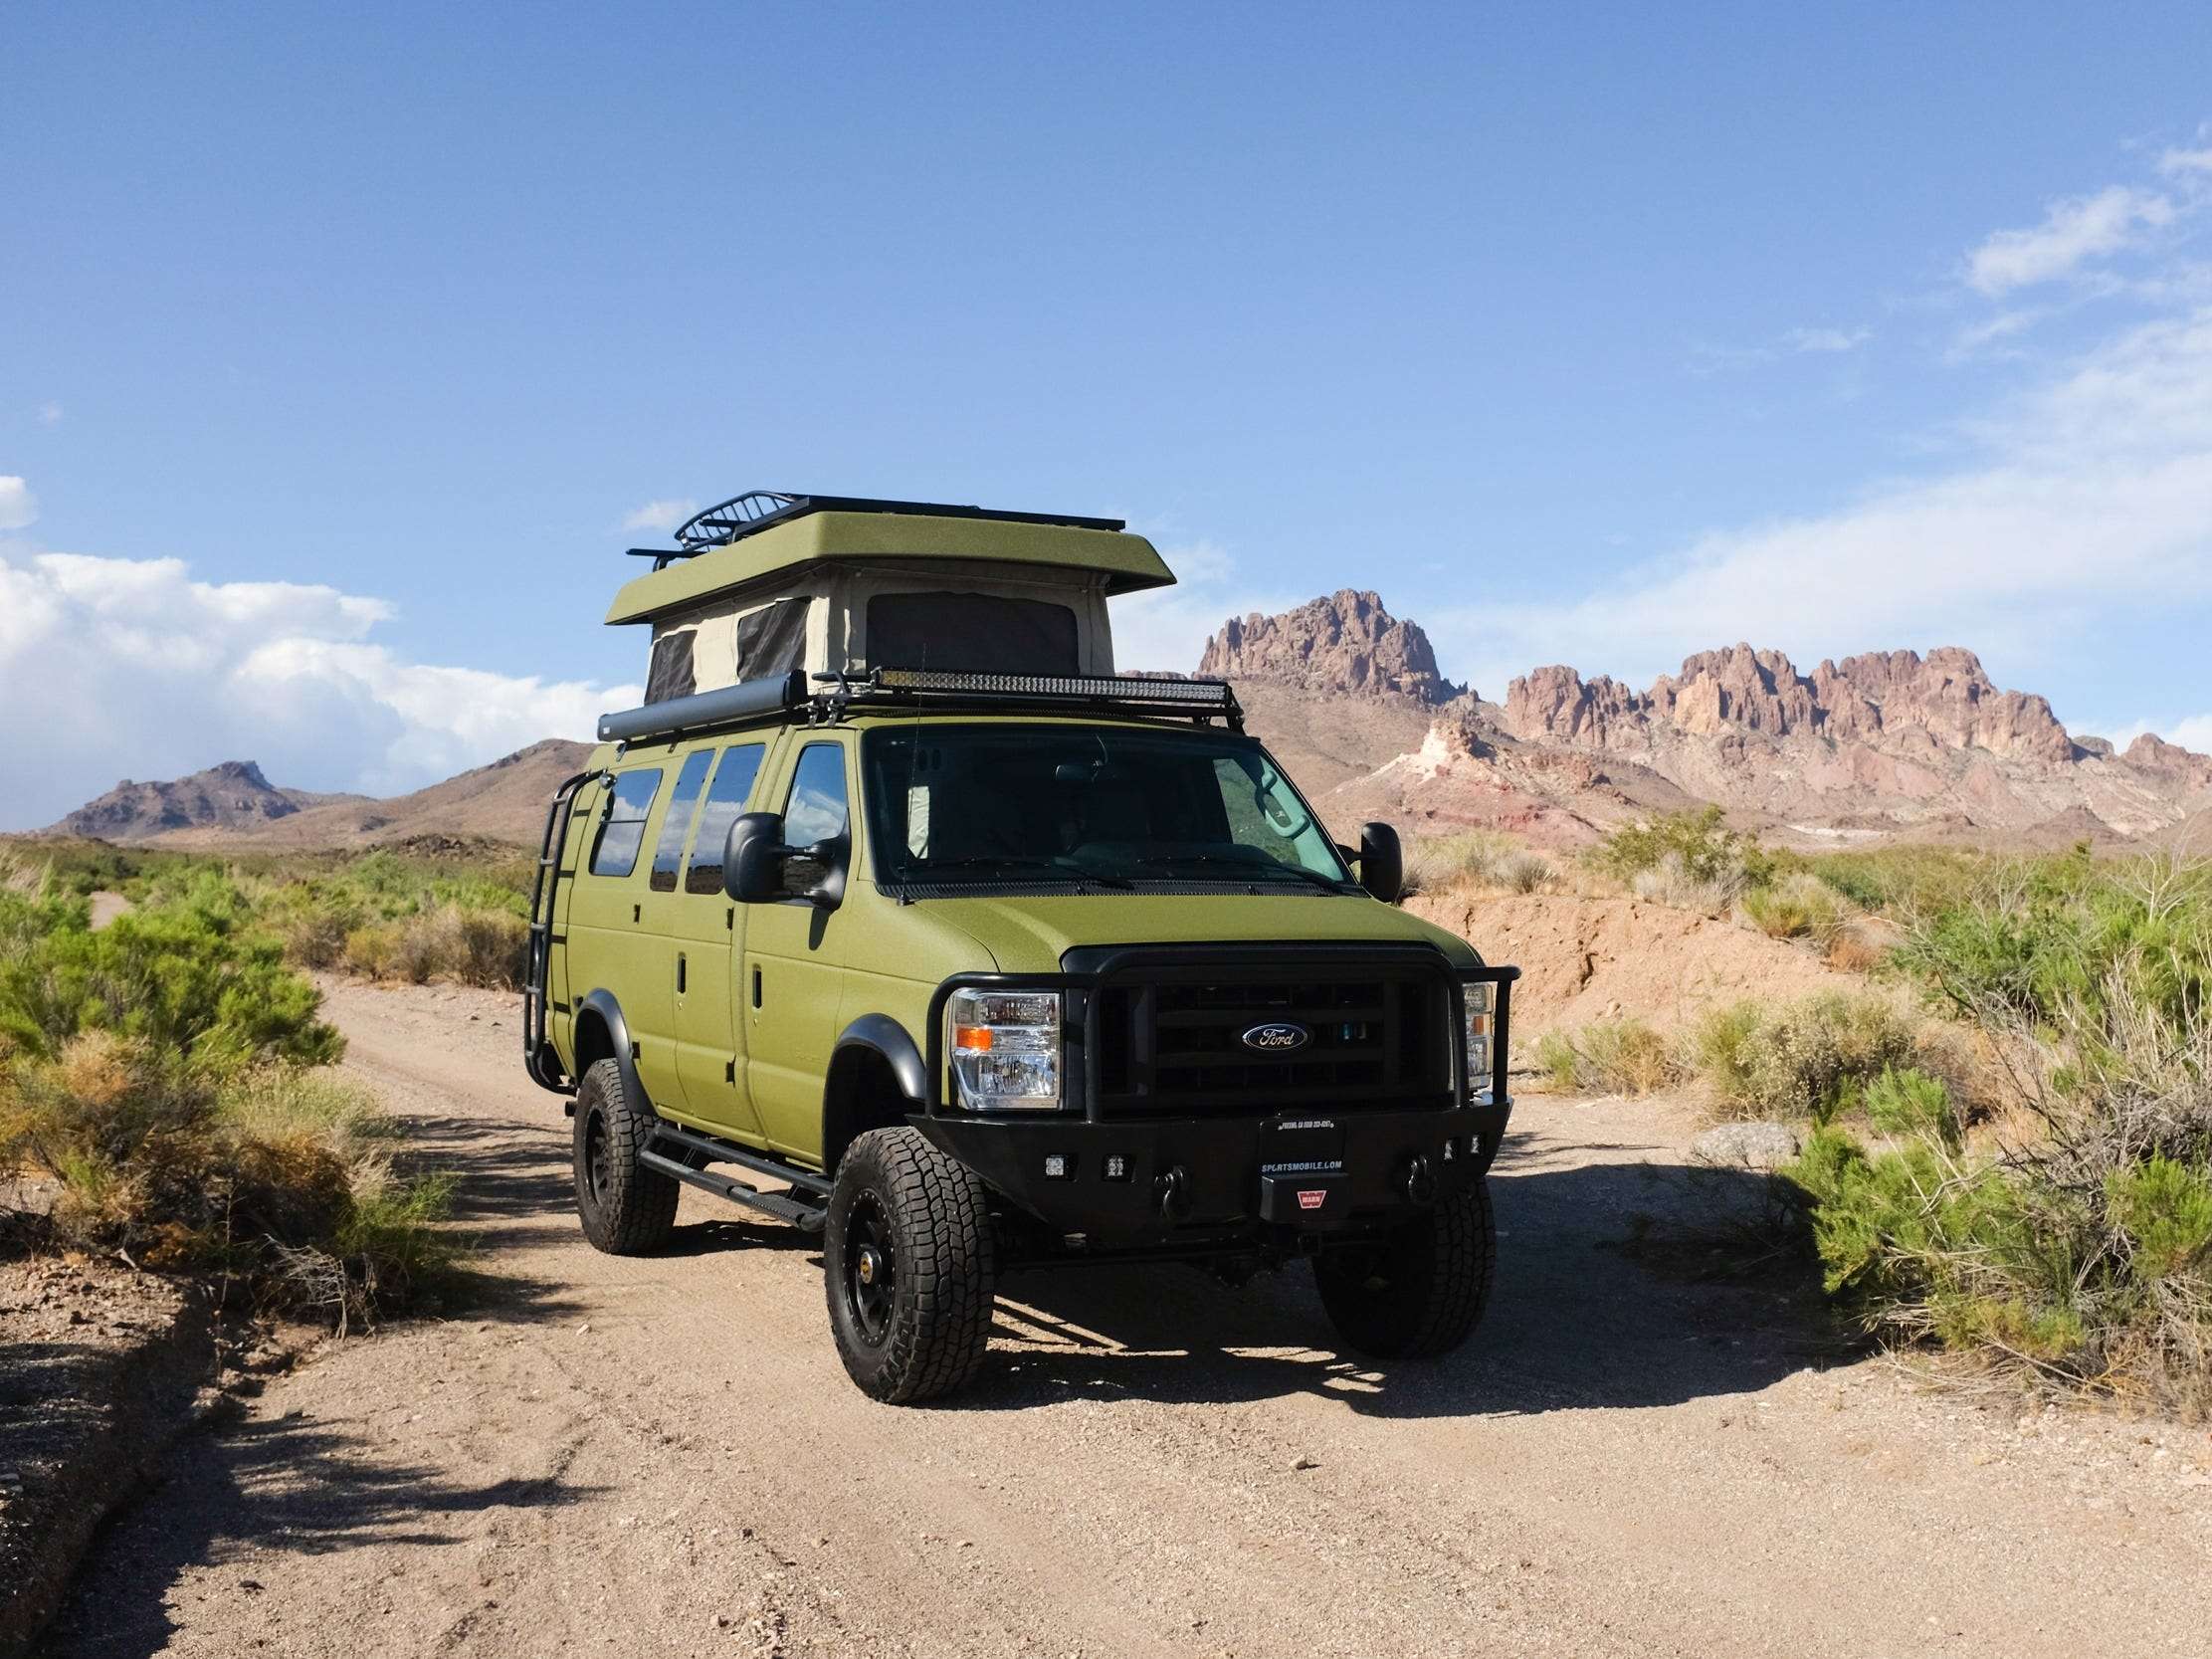 Sportsmobile S Off Road Ford Camper Van Has A Penthouse Roof For Up To 225 000 — See Inside